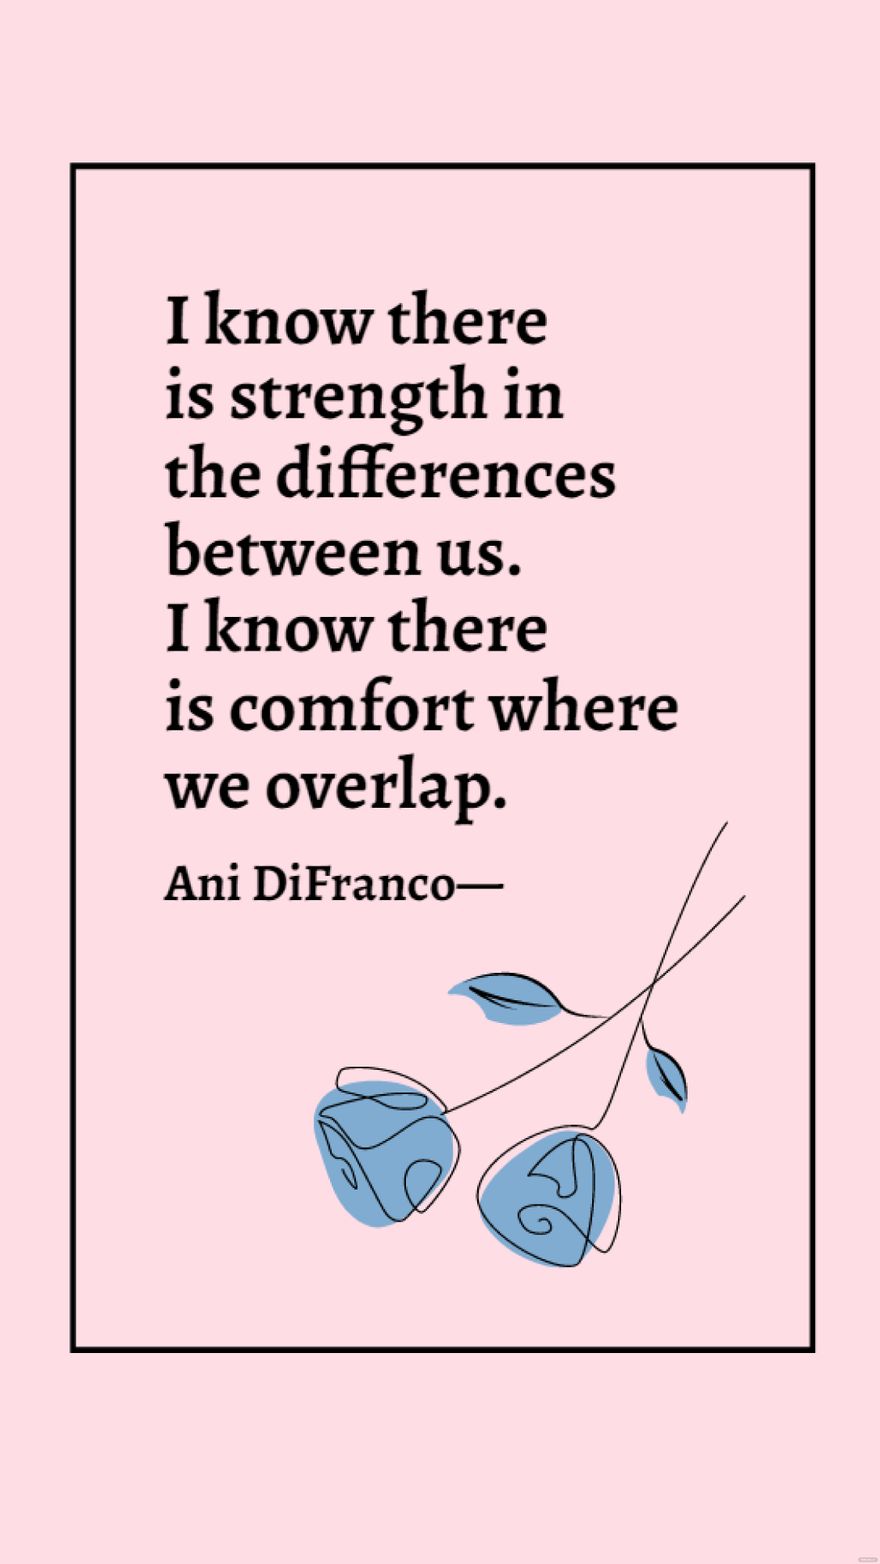 Free Ani DiFranco - I know there is strength in the differences between us. I know there is comfort where we overlap. in JPG